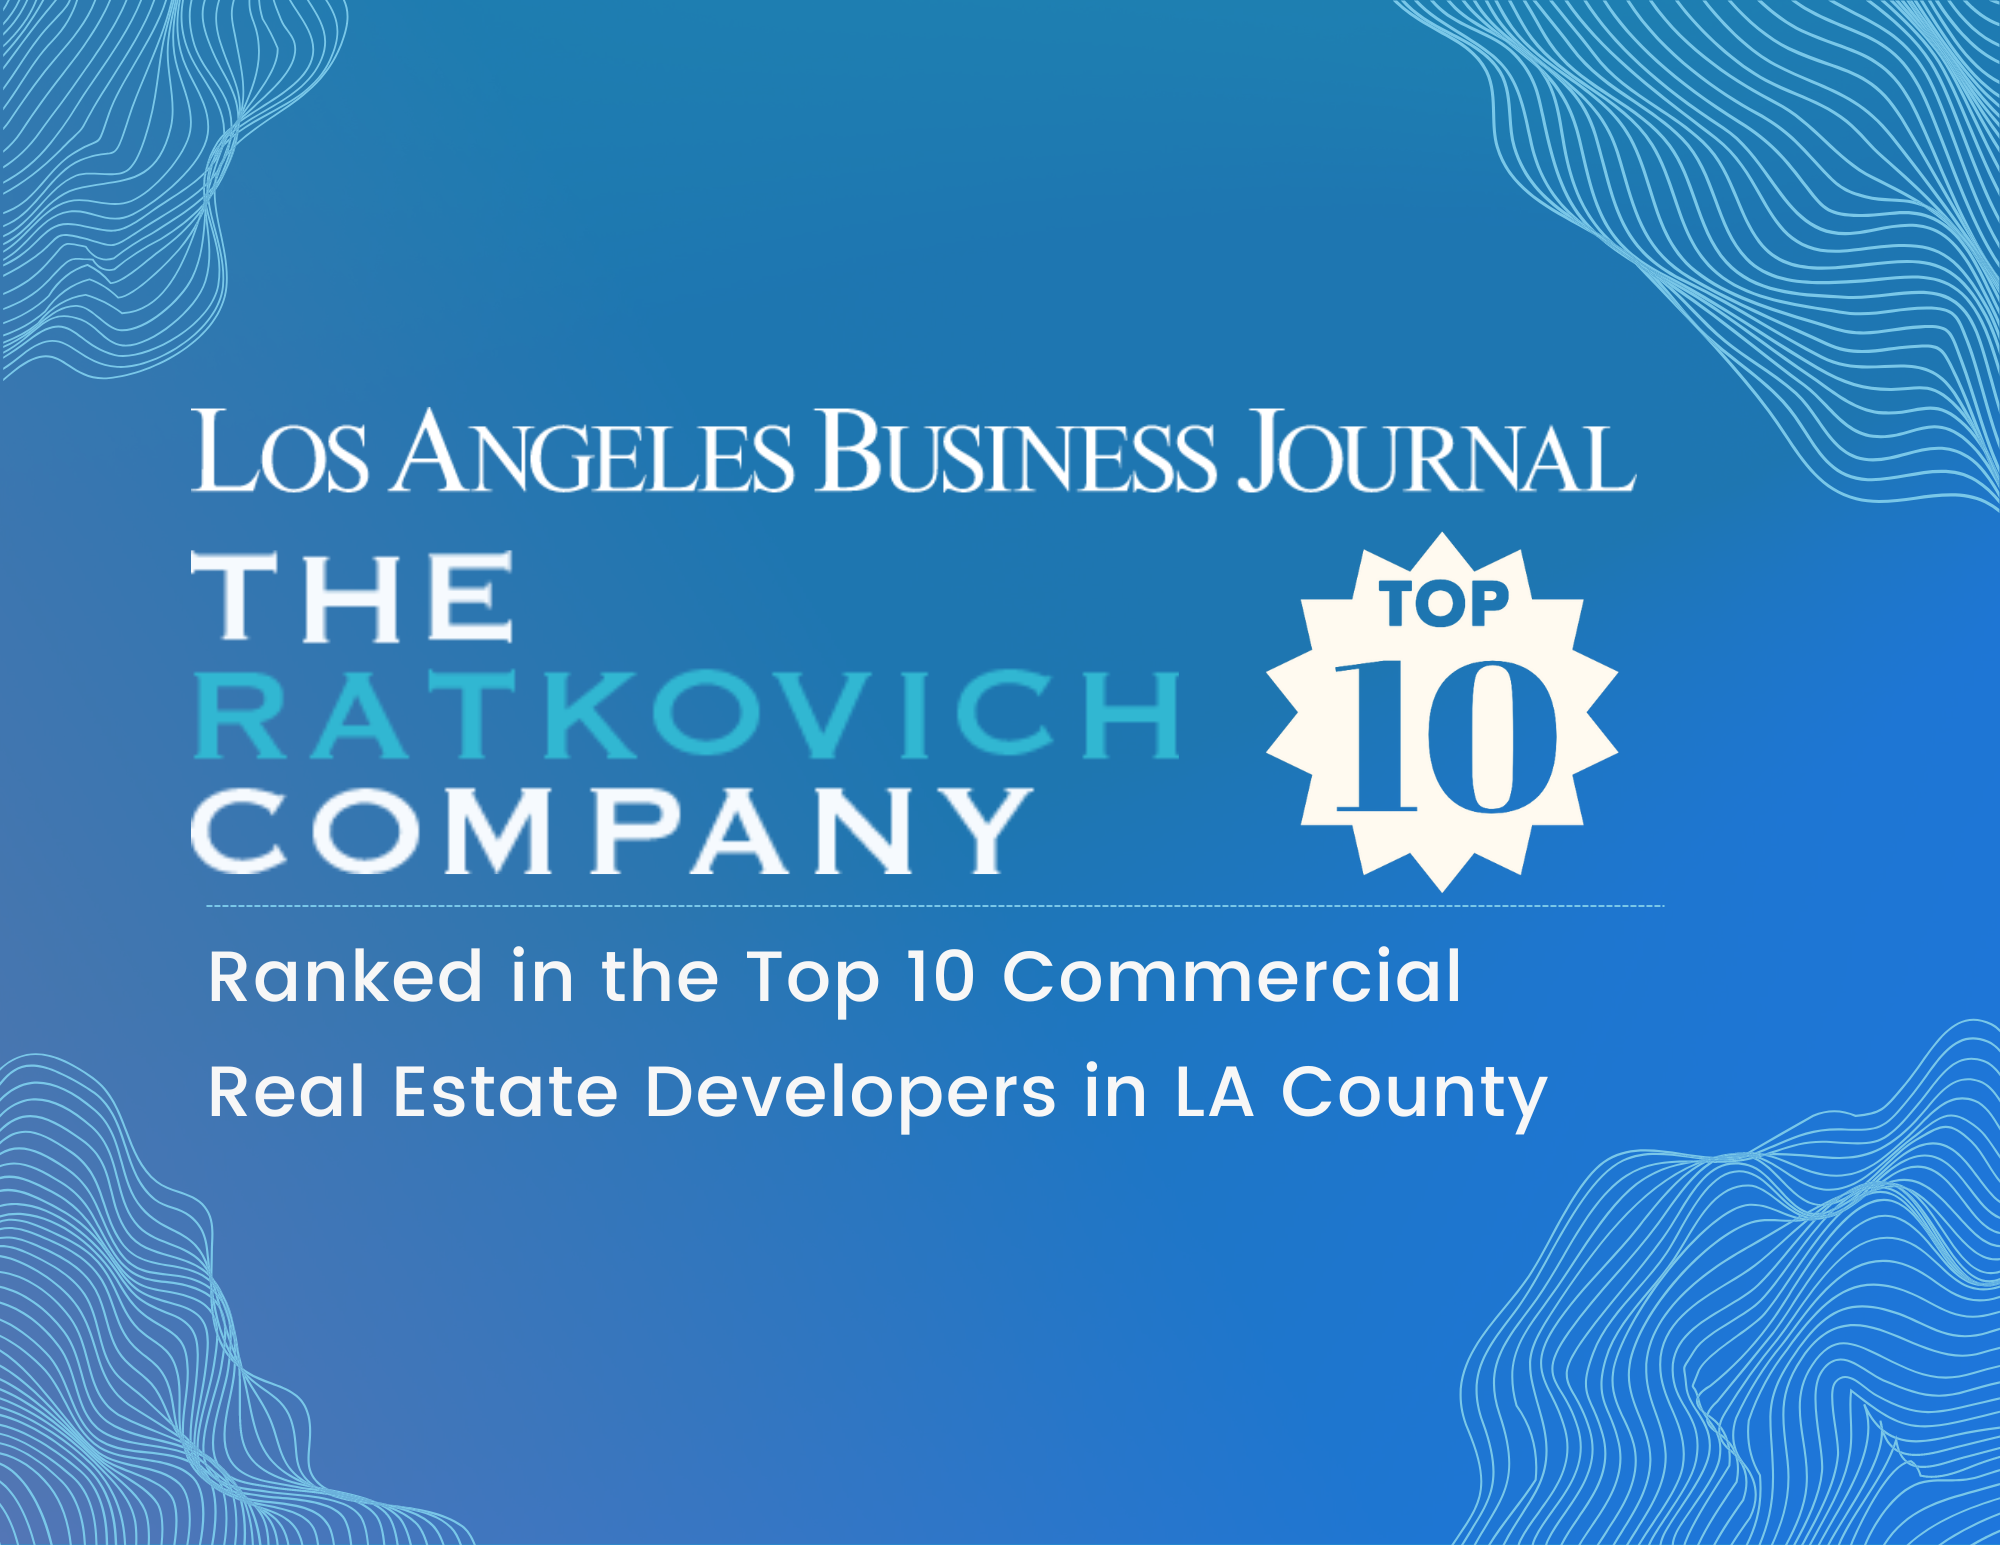 Congrats to the entire team and our partners for making LABJ’s Top 10 list!